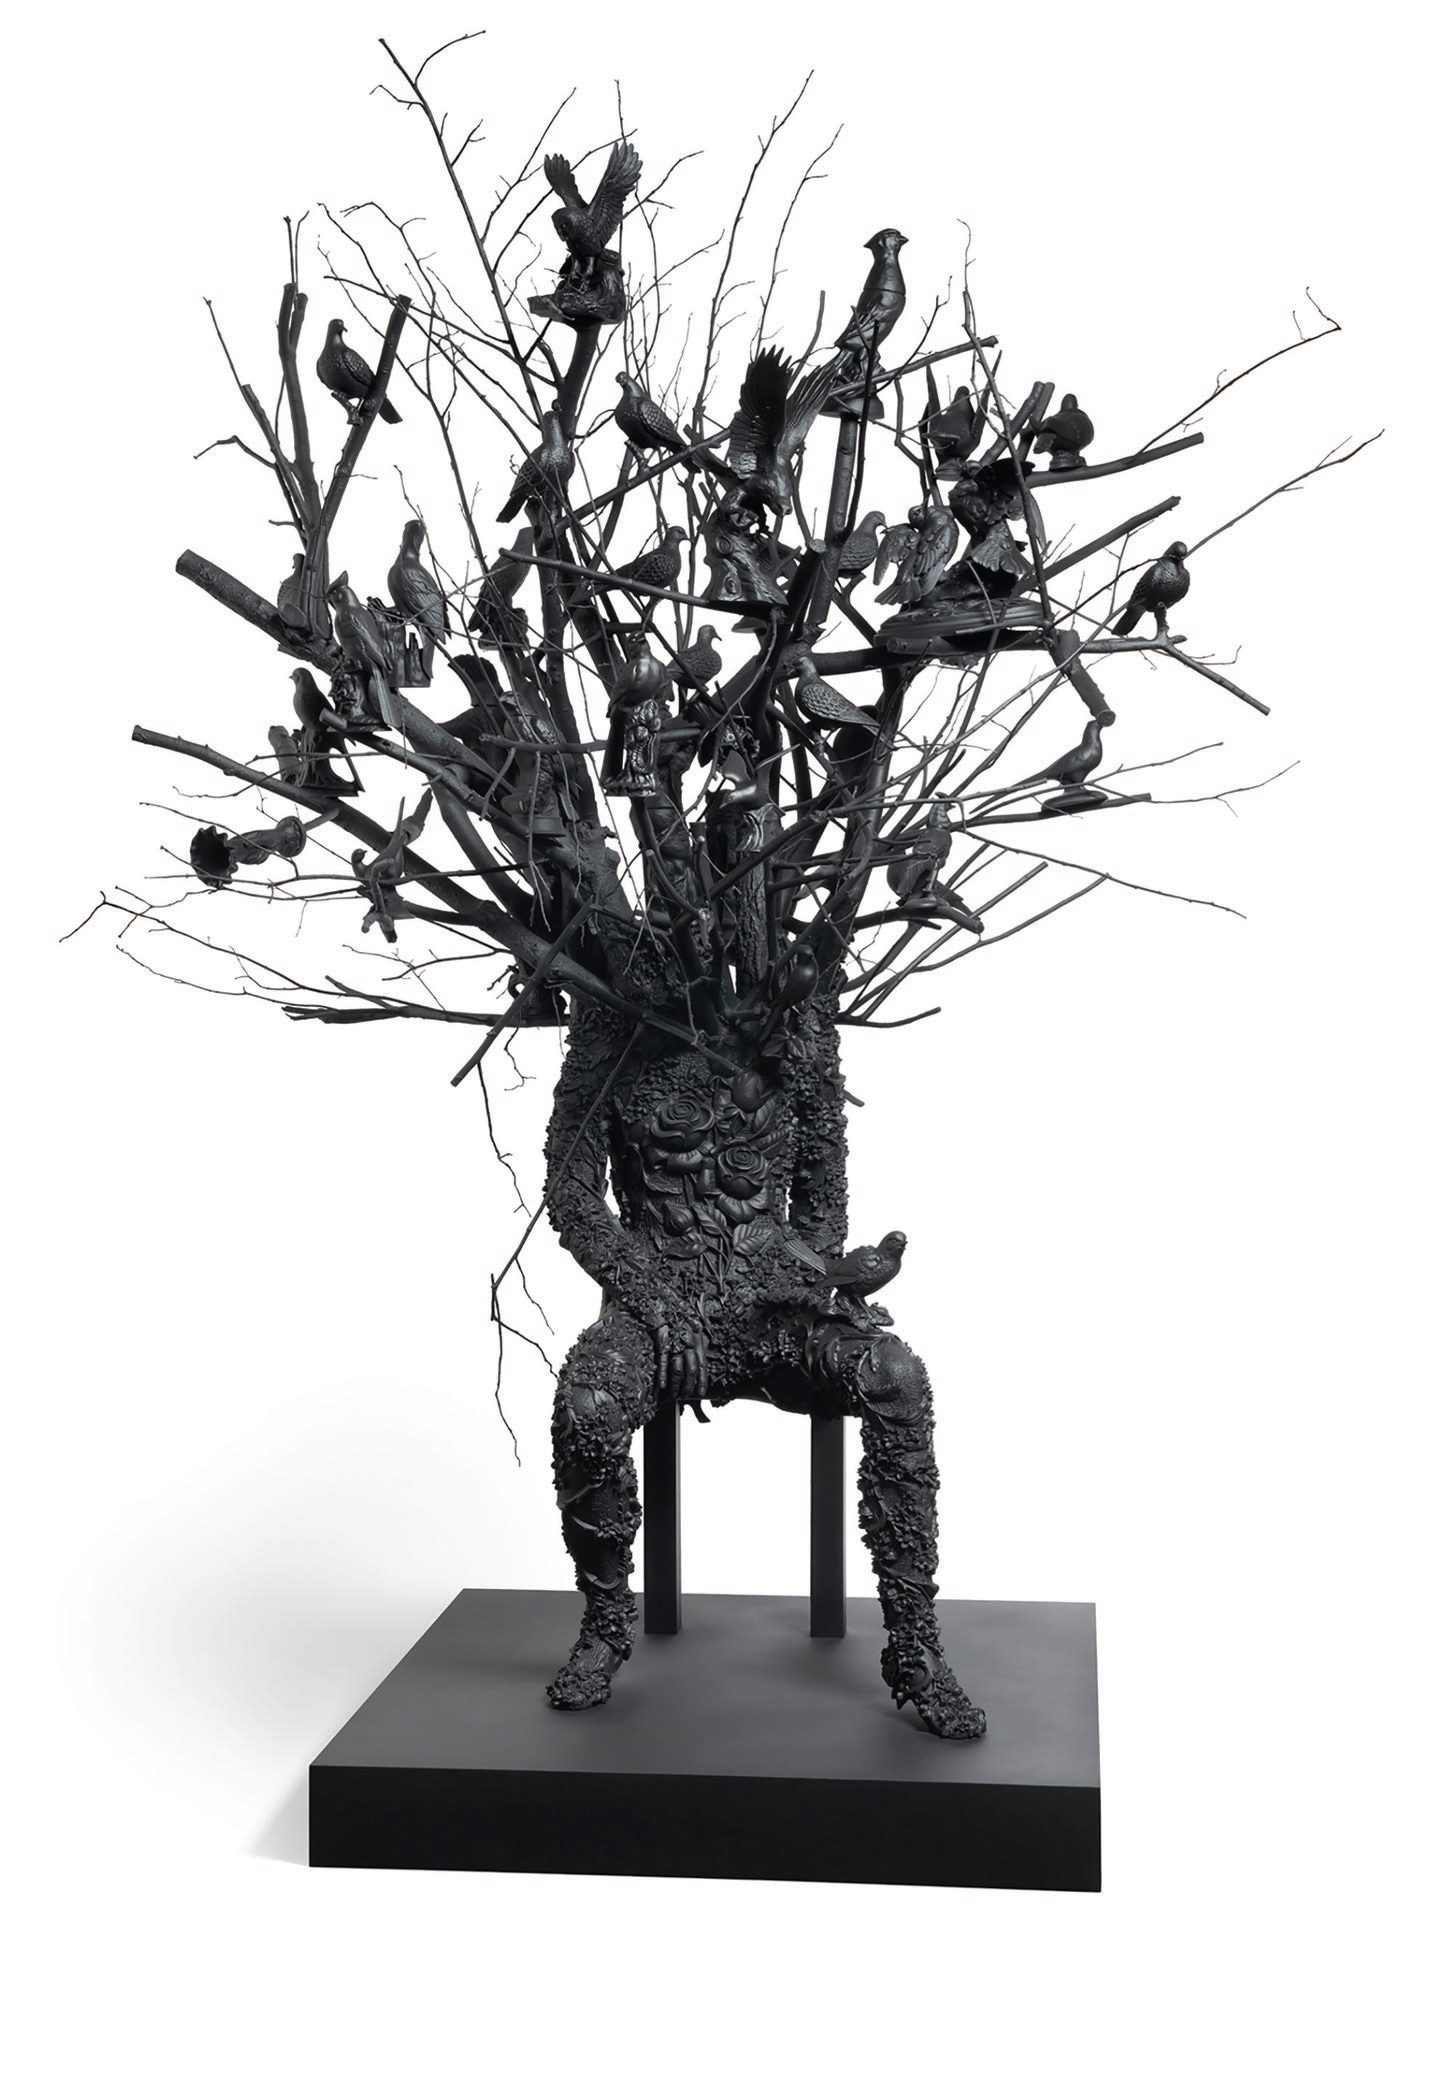 “A·mal·gam” (2021, bronze), 122 inches by 94 inches by 85 inches PHOTO COURTESY OF THE ARTIST AND JACK SHAINMAN GALLERY, NEW YORK